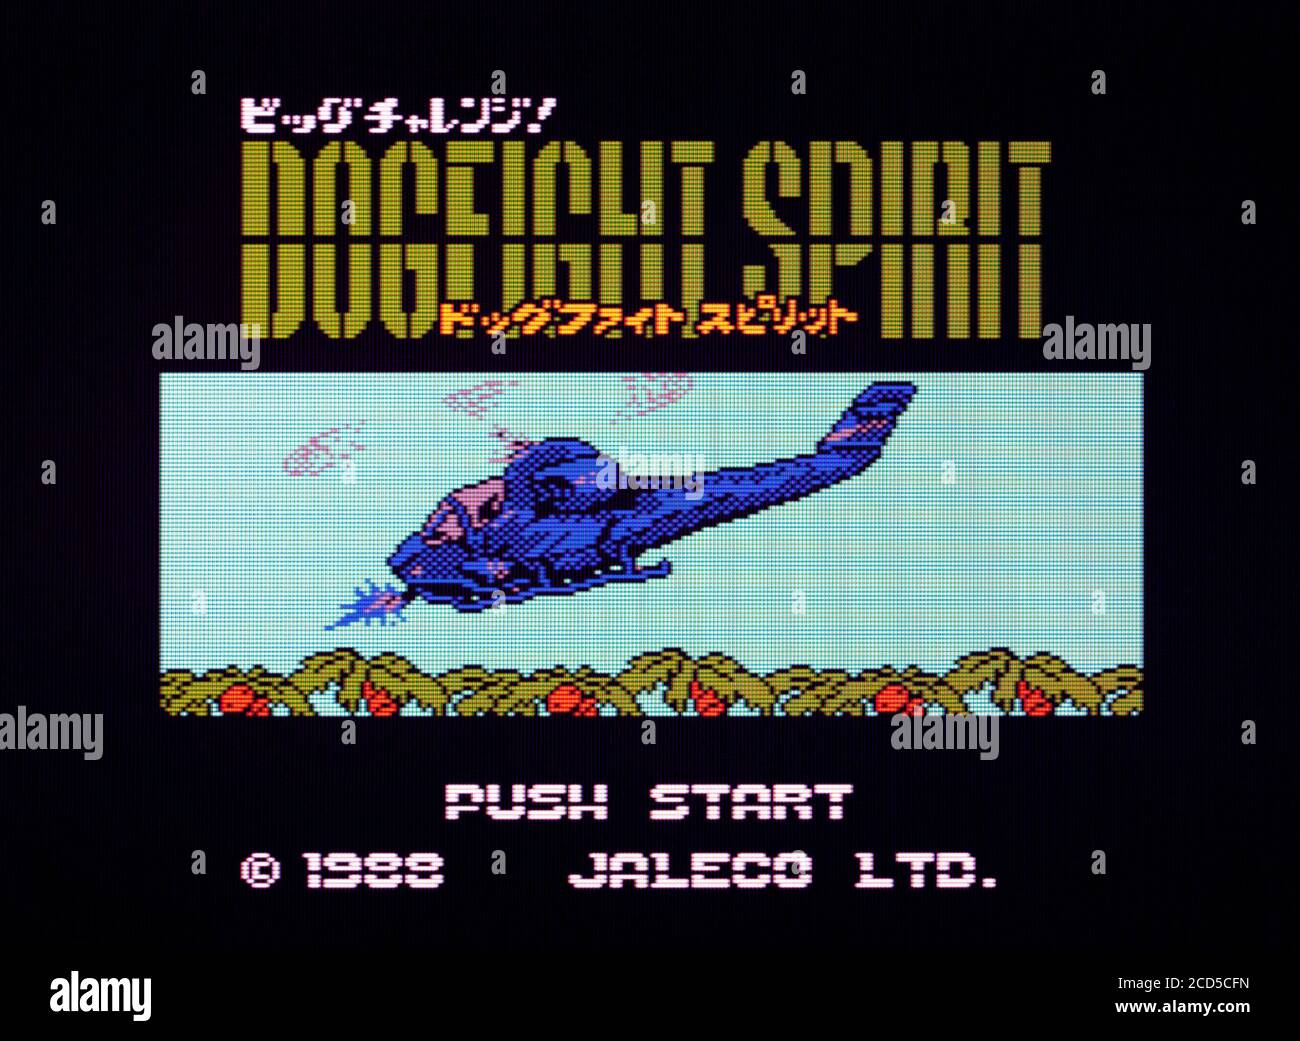 Big Challenge Dogfight Spirit - Nintendo Famicom Disk System Videogame - Editorial use only Stock Photo